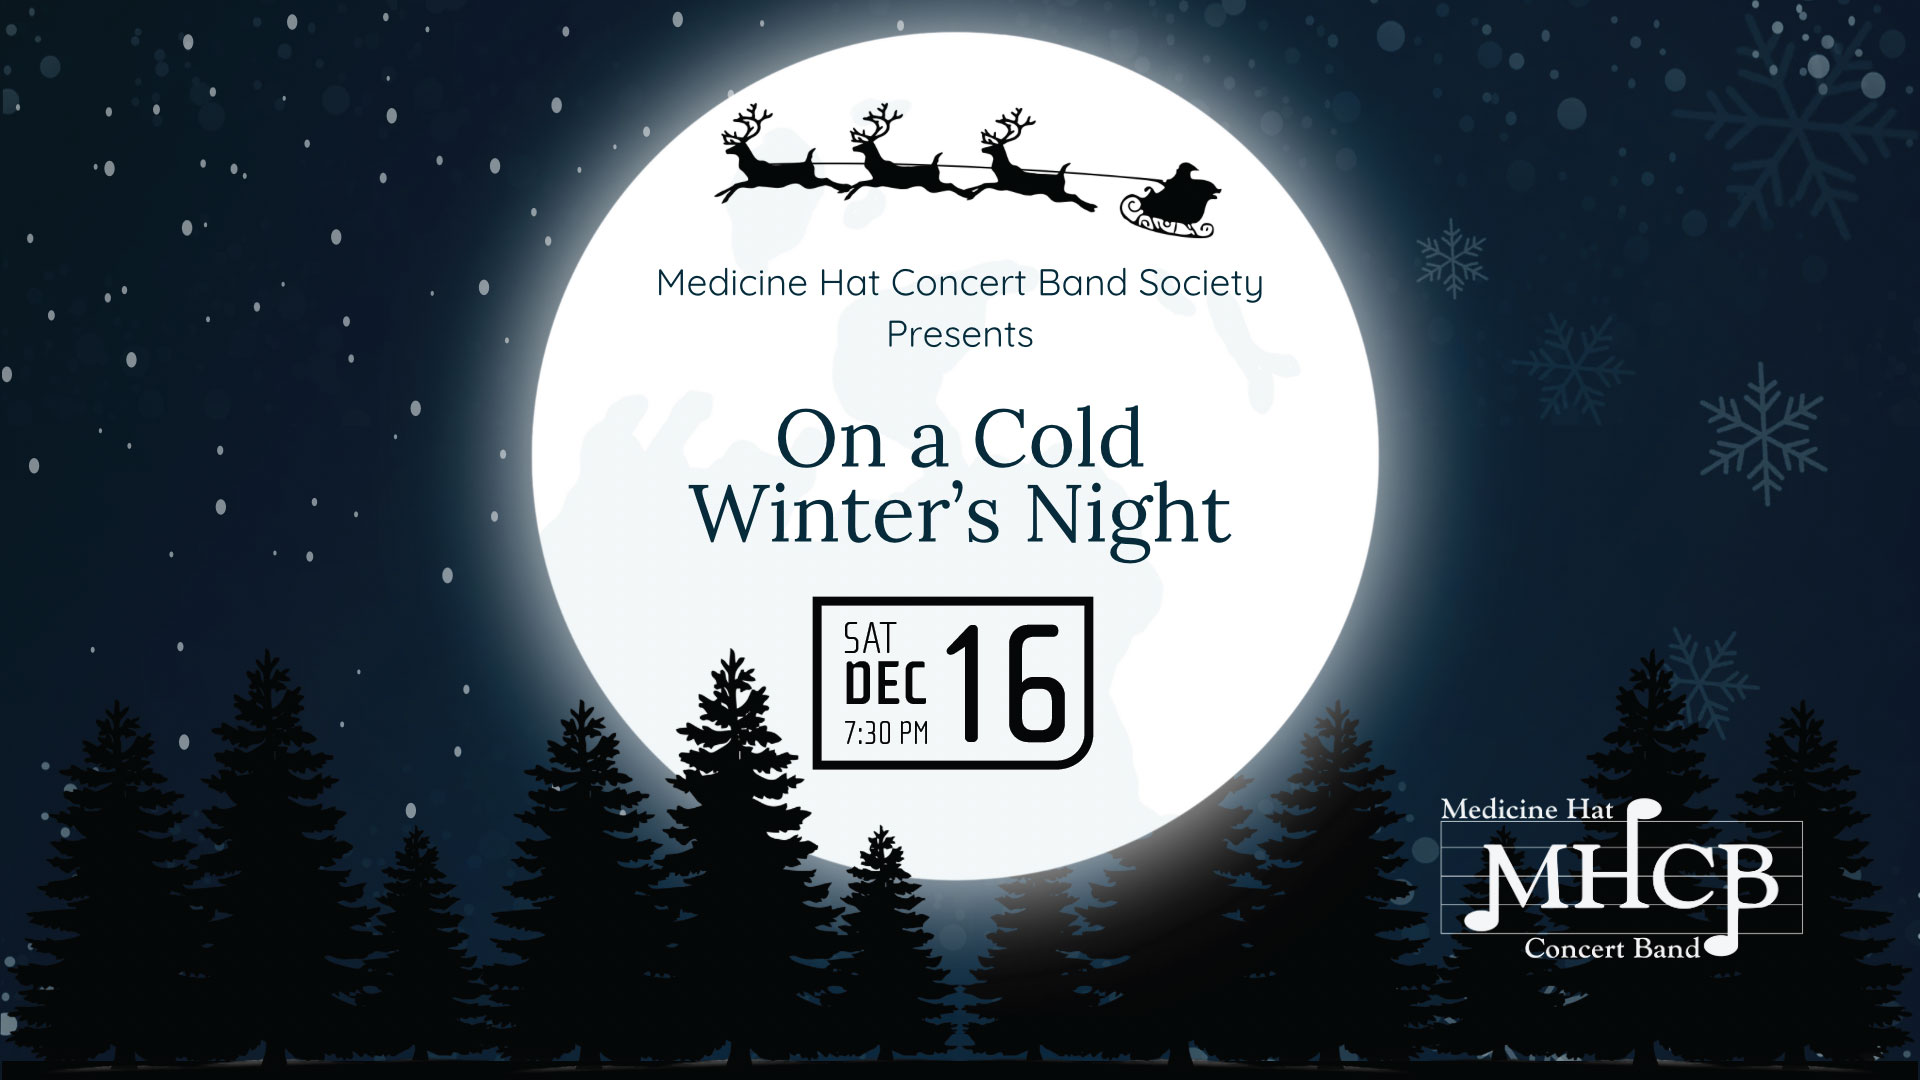 MHCB Presents - On A Cold Winter's Night